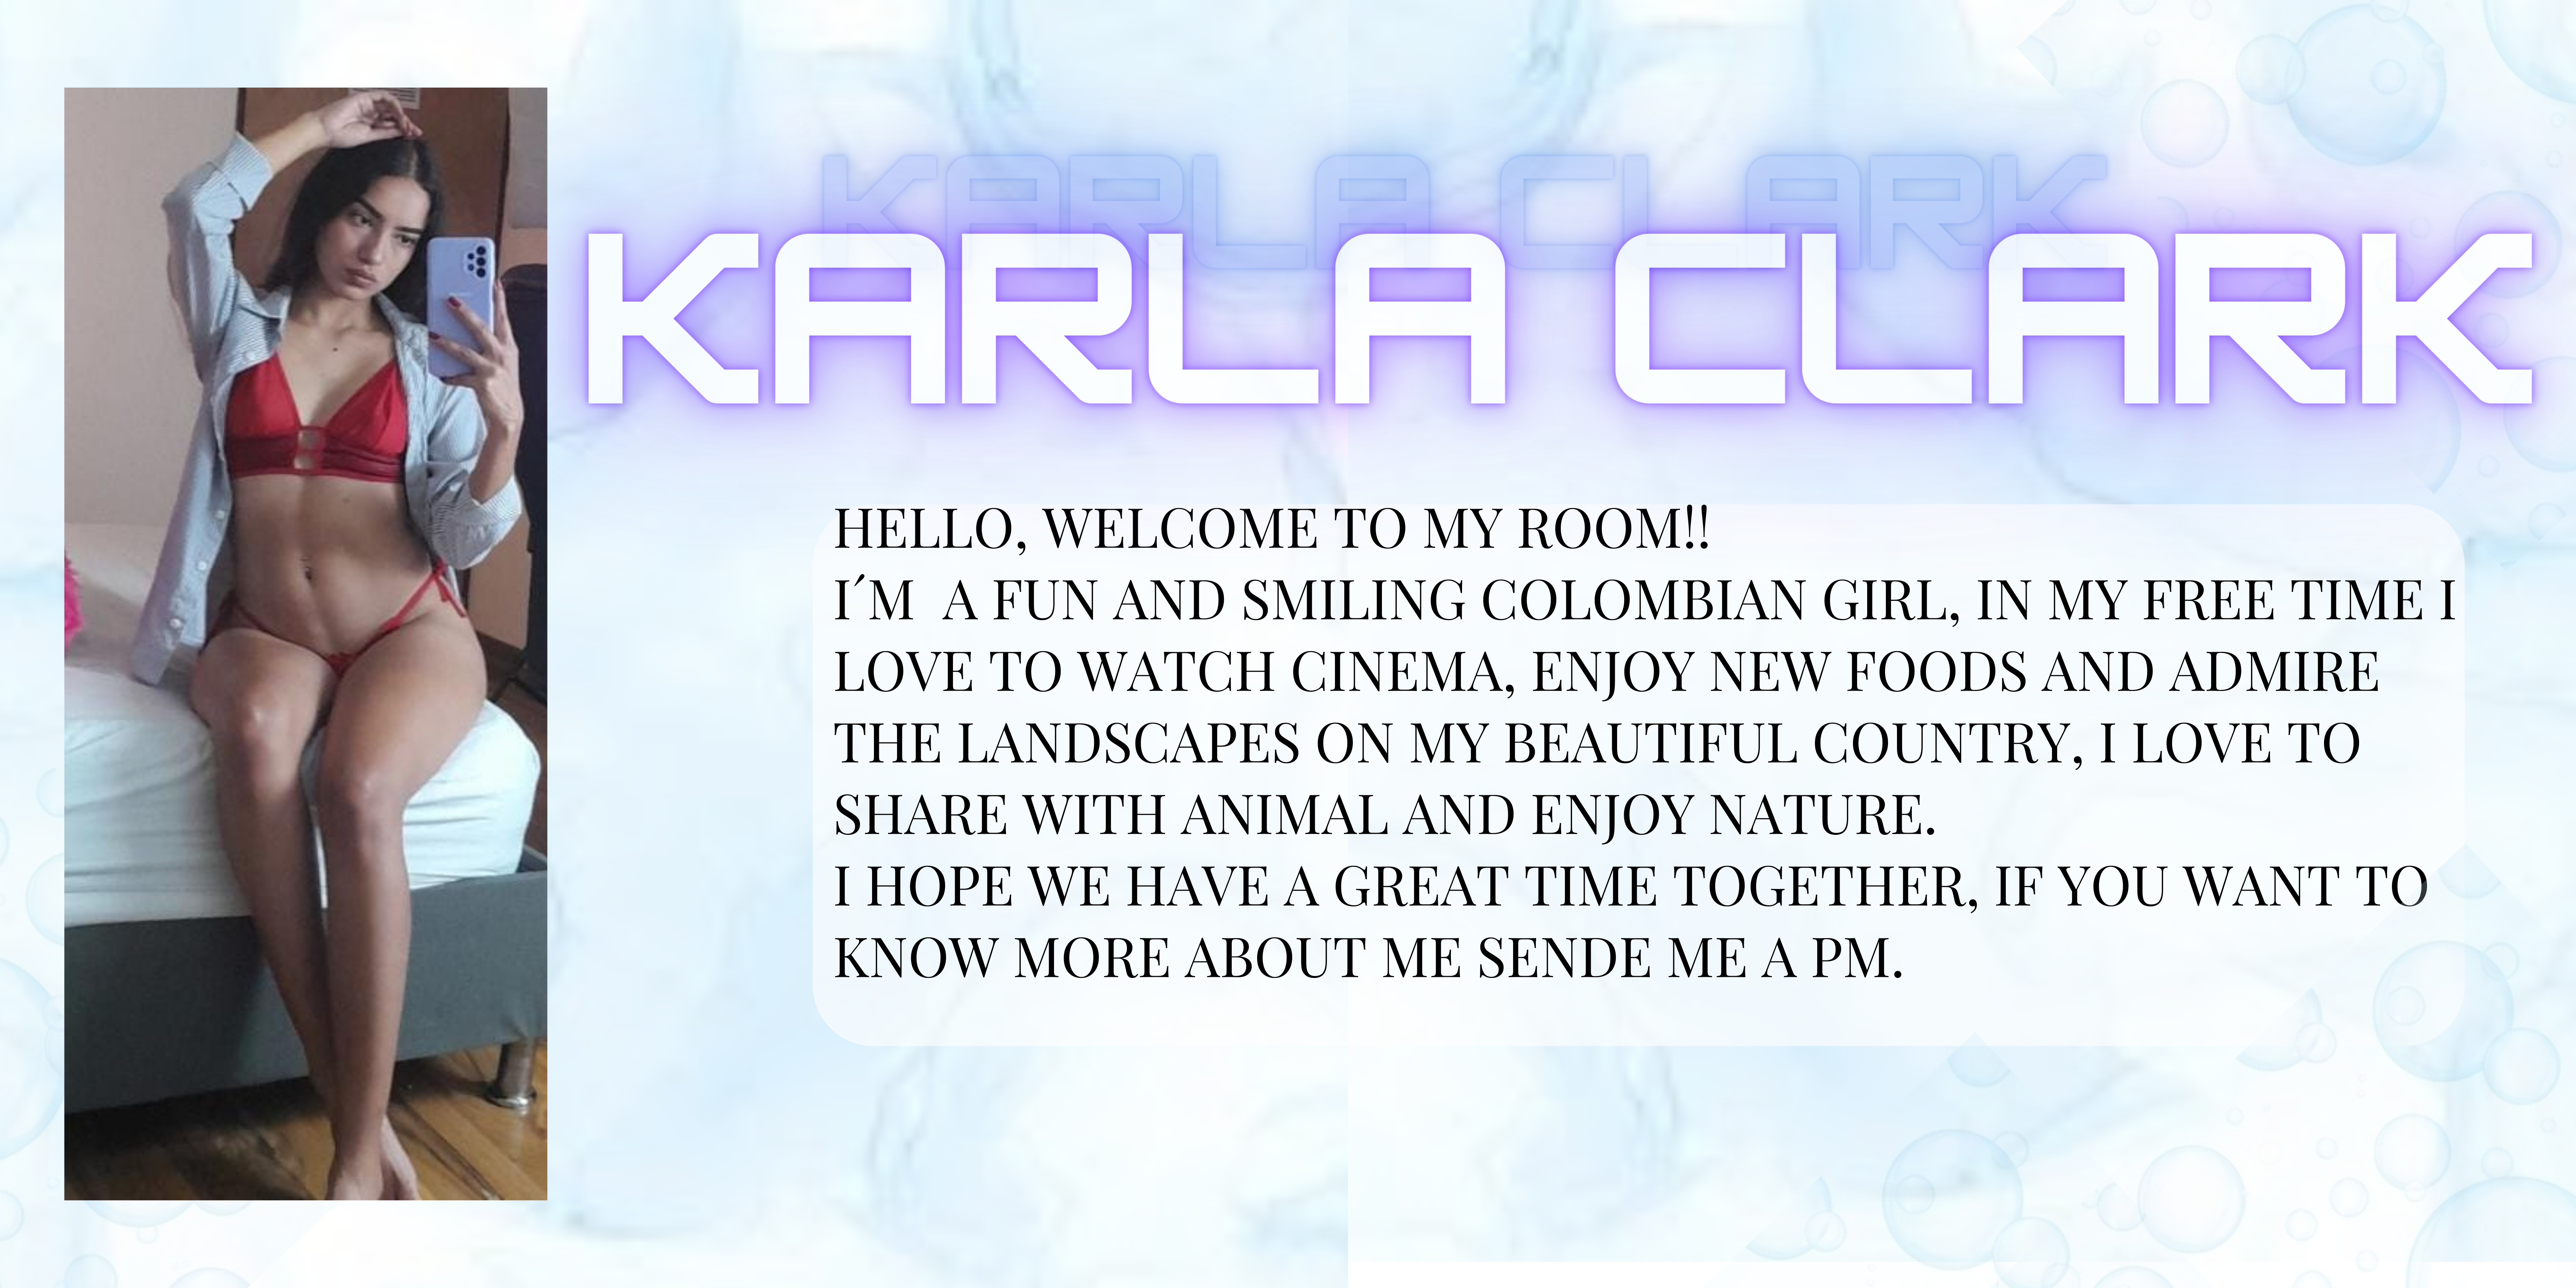 karla-clark about me image: 1